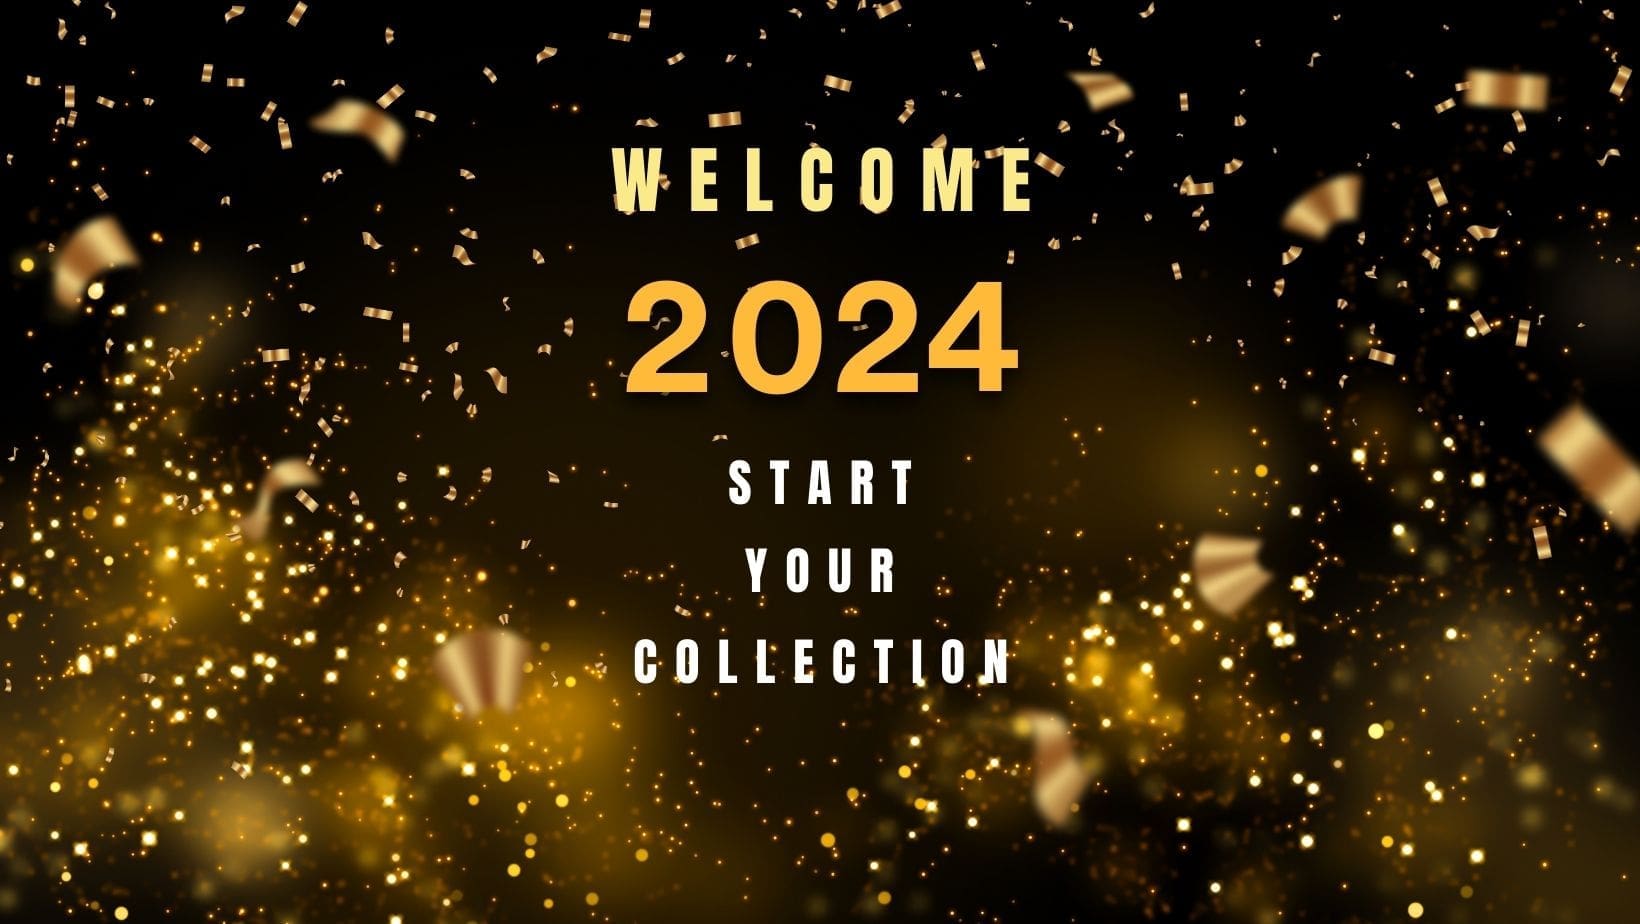 Welcome 2024 Start your Collection